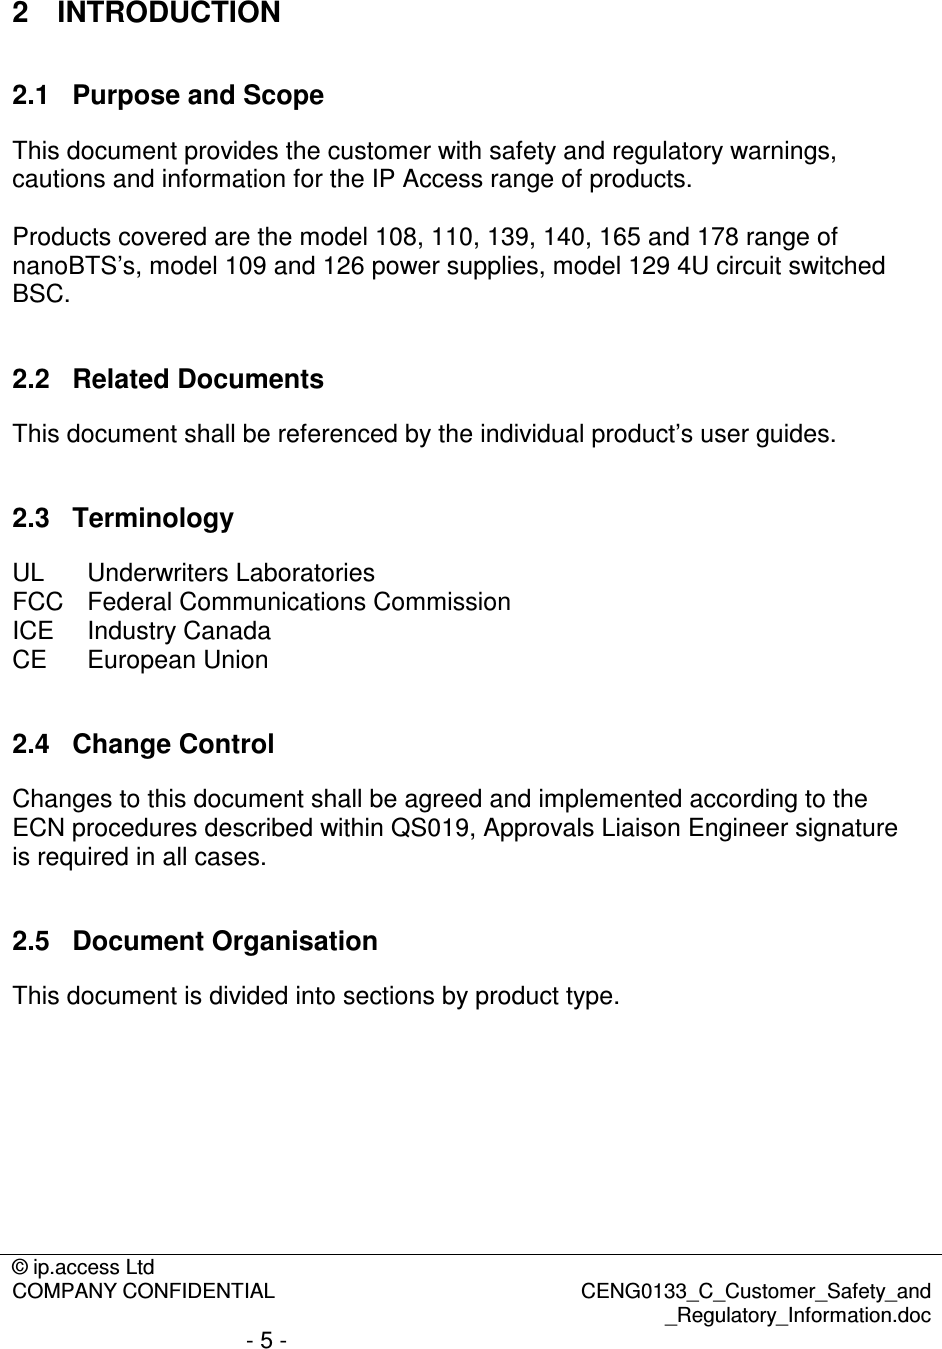 © ip.access Ltd  COMPANY CONFIDENTIAL  CENG0133_C_Customer_Safety_and _Regulatory_Information.doc - 5 -   2  INTRODUCTION 2.1  Purpose and Scope This document provides the customer with safety and regulatory warnings, cautions and information for the IP Access range of products.  Products covered are the model 108, 110, 139, 140, 165 and 178 range of nanoBTS’s, model 109 and 126 power supplies, model 129 4U circuit switched BSC.  2.2  Related Documents This document shall be referenced by the individual product’s user guides.  2.3  Terminology UL   Underwriters Laboratories  FCC  Federal Communications Commission ICE  Industry Canada CE  European Union  2.4  Change Control Changes to this document shall be agreed and implemented according to the ECN procedures described within QS019, Approvals Liaison Engineer signature is required in all cases.   2.5  Document Organisation This document is divided into sections by product type. 